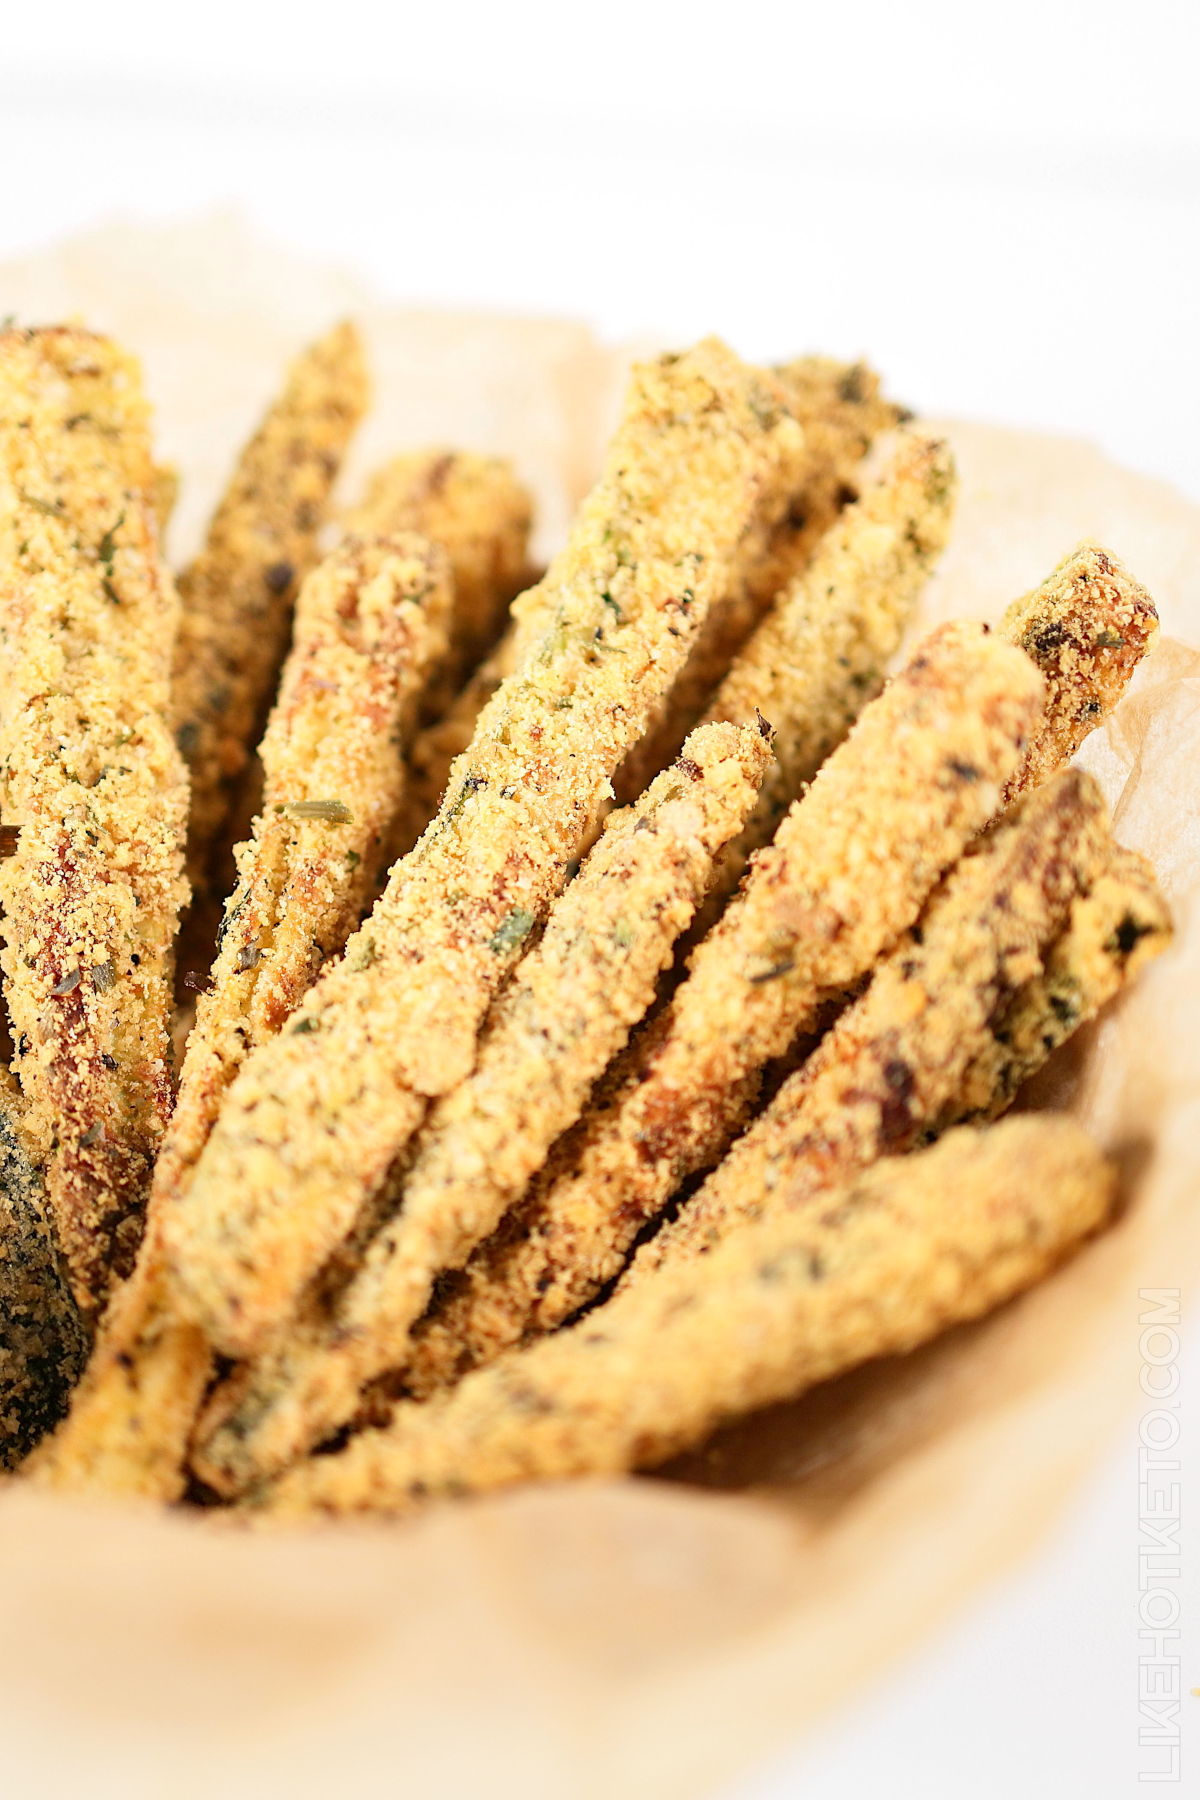 Baked zucchini fries served in a basket lined with parchment paper.